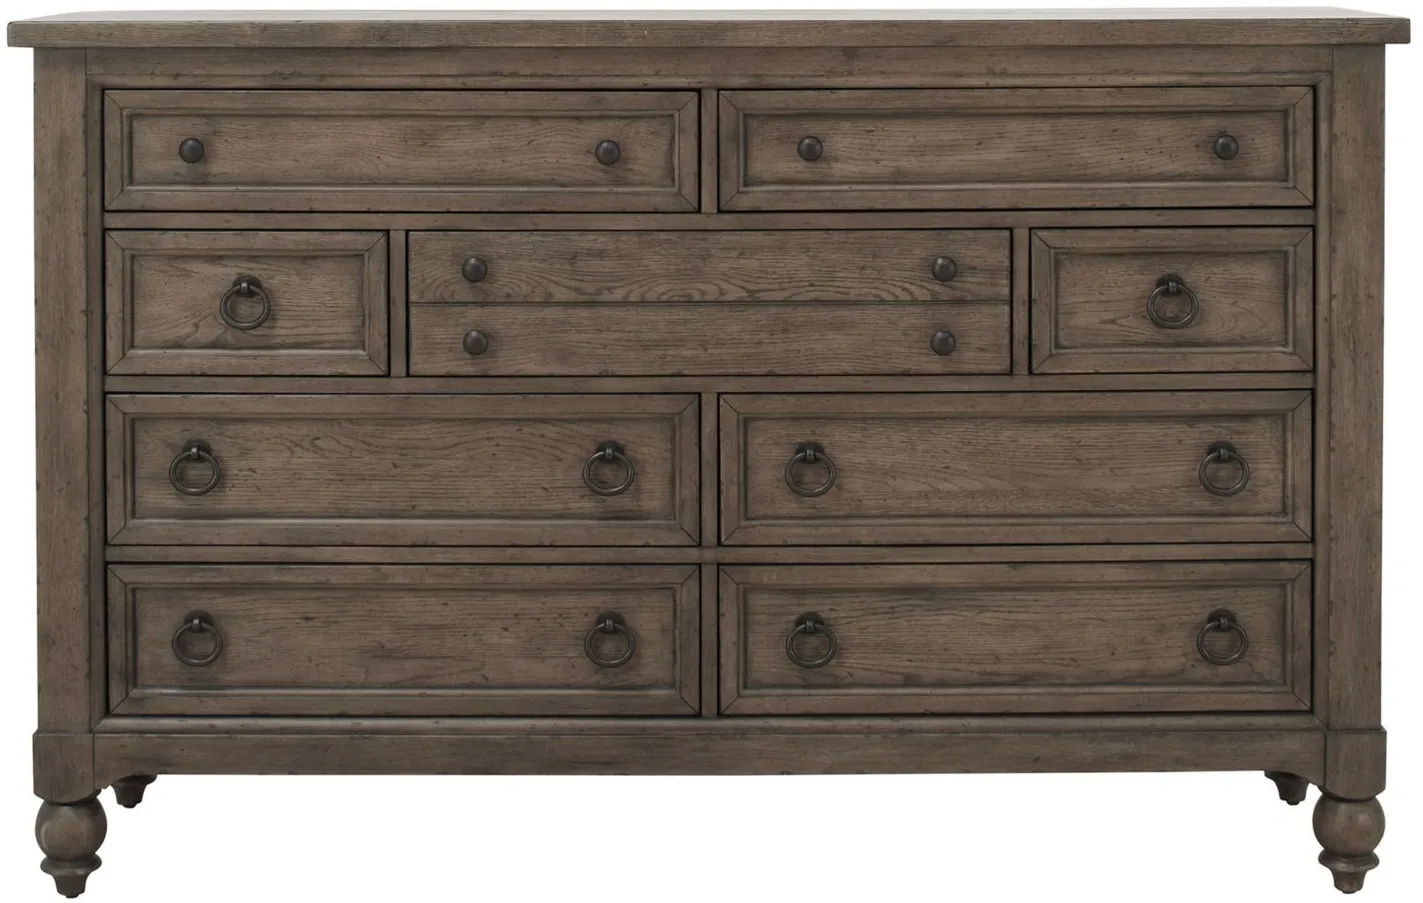 Coventry Dresser in Dusty Taupe by Liberty Furniture